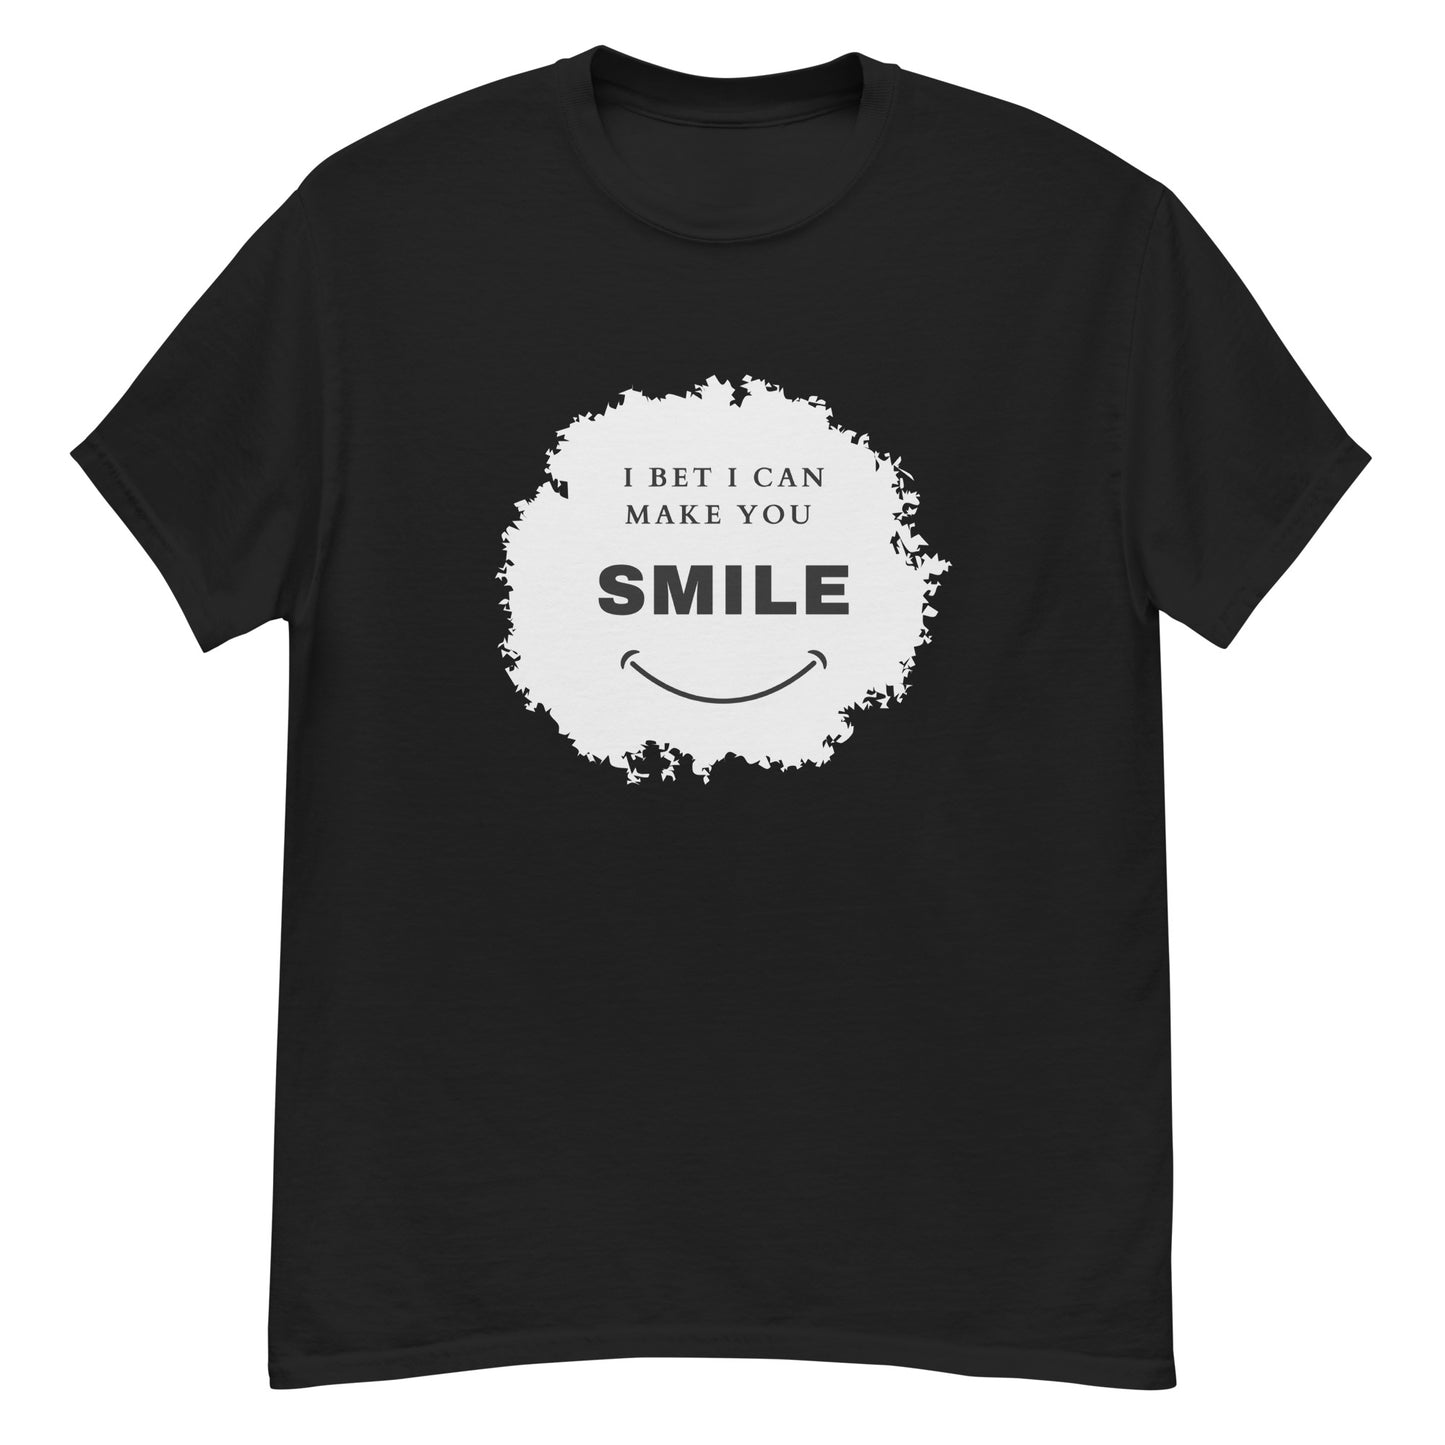 I Bet I can Make You Smile, Men's classic tee